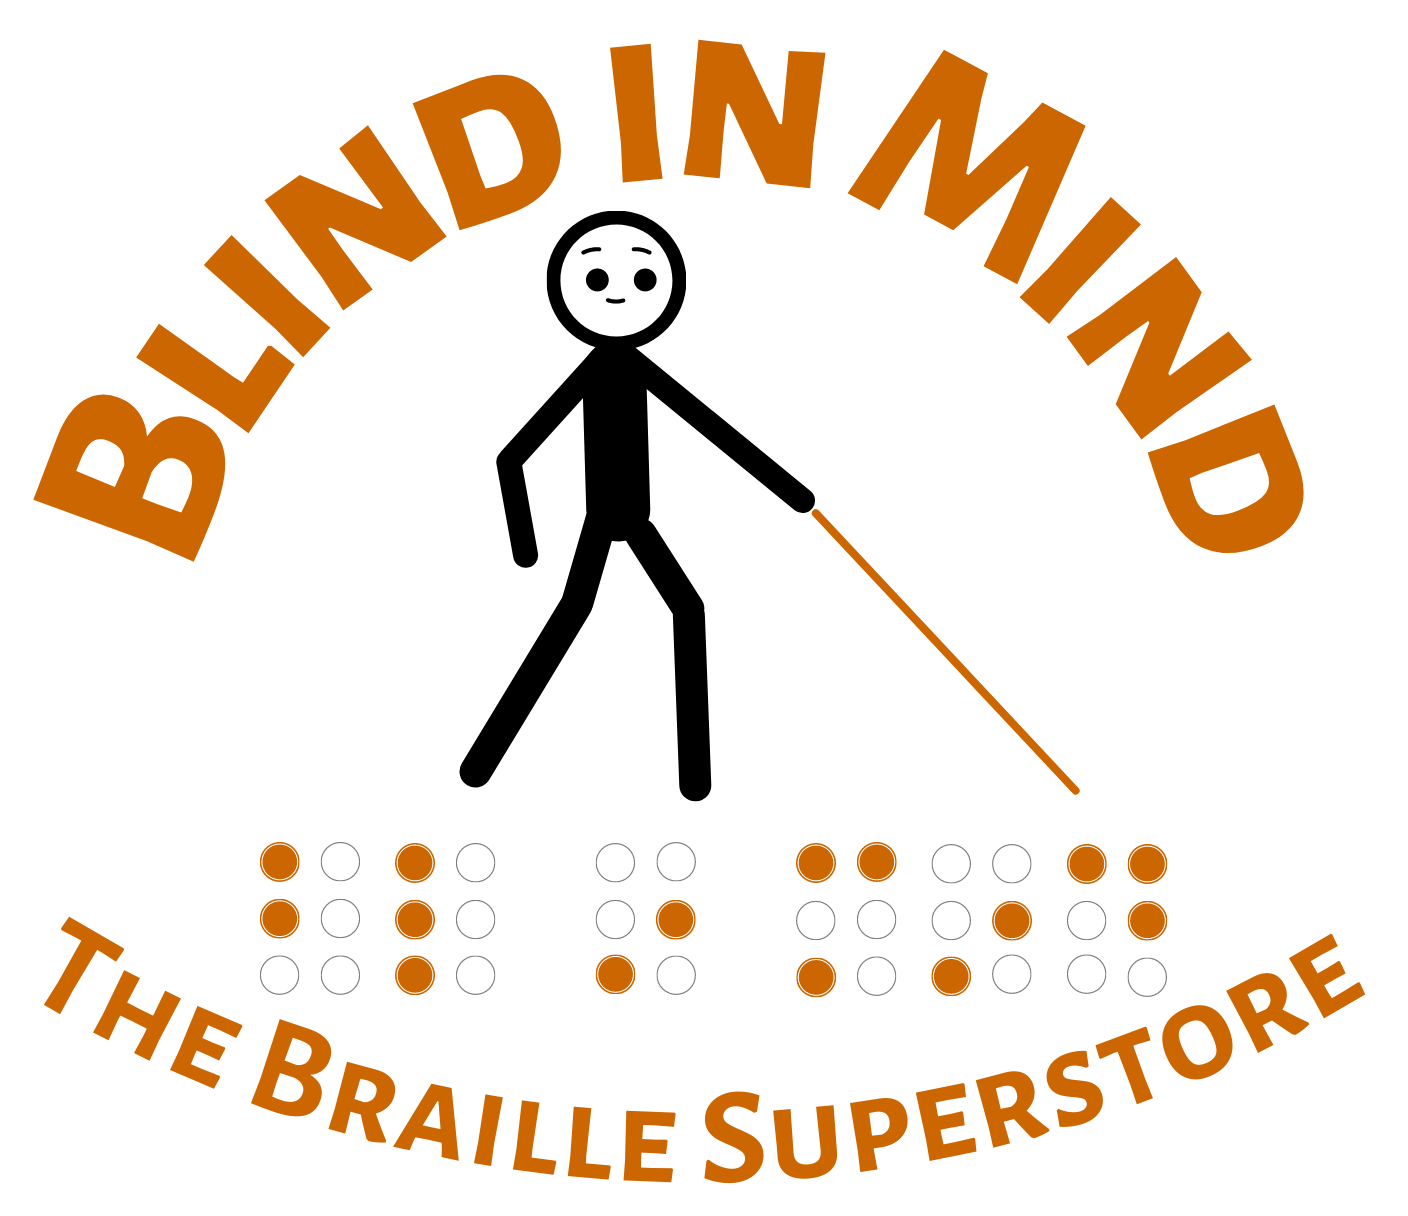 Future Aids, The Braille Superstore